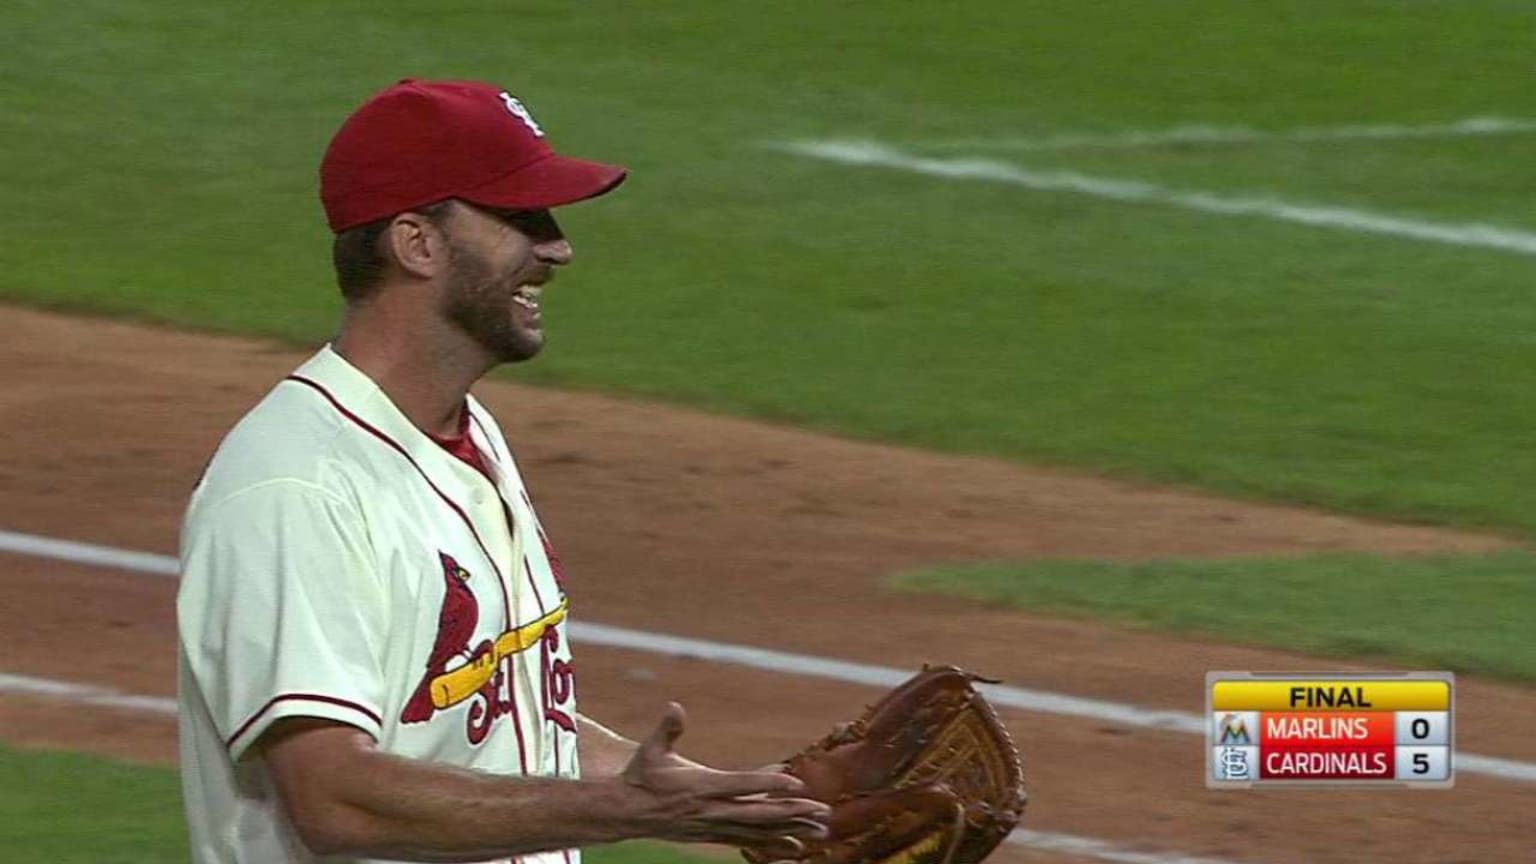 Goold: Wainwright pulls off pitch-perfect prank on Padres' Schumaker